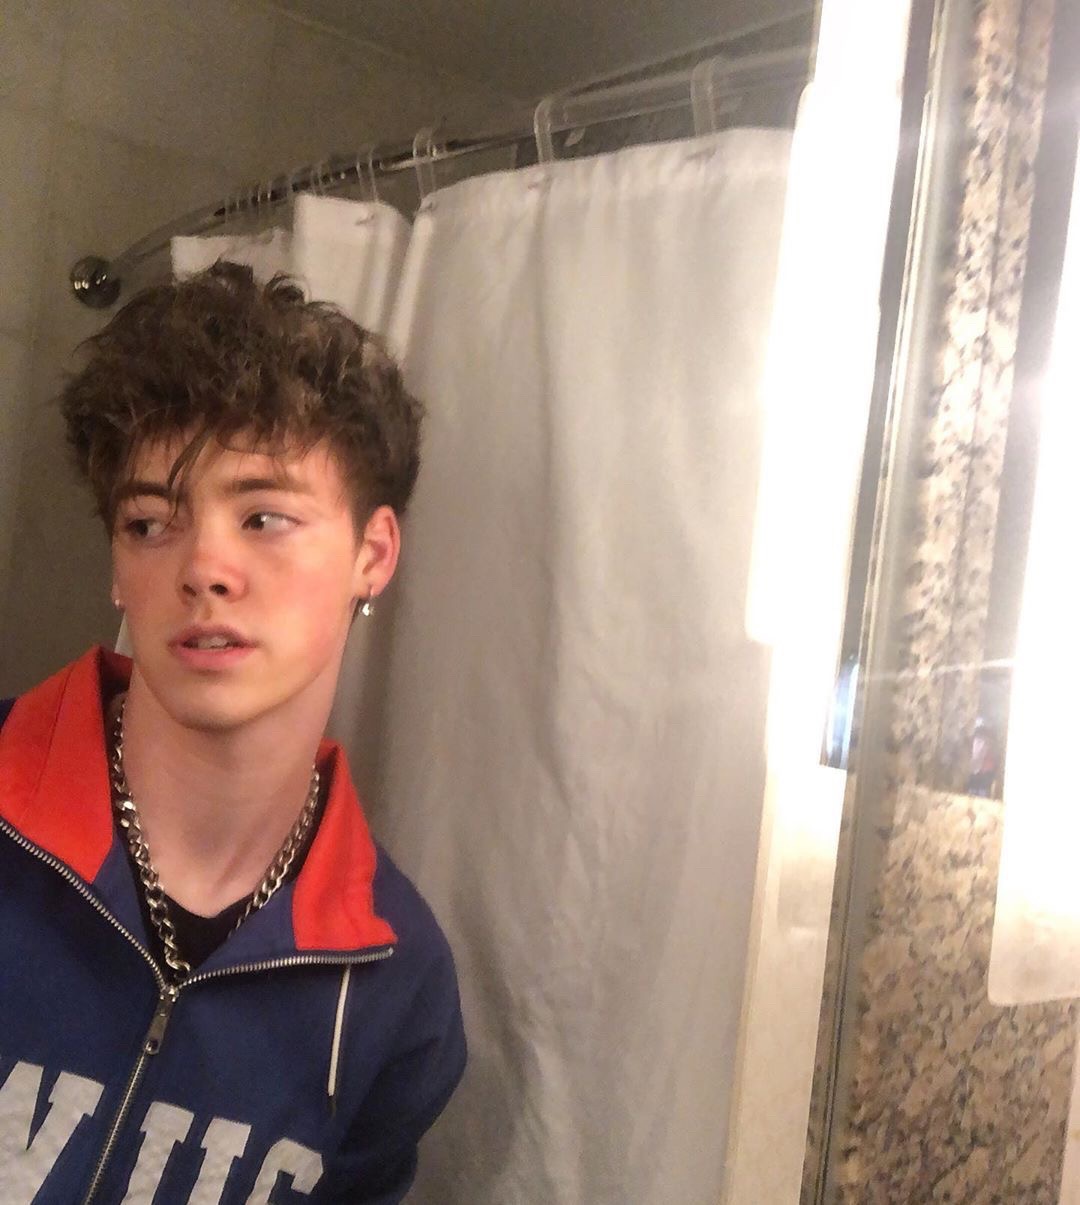 See Zach Herron Profile and Image Collections on PicsArt - 256 x 256 jpeg 15kB